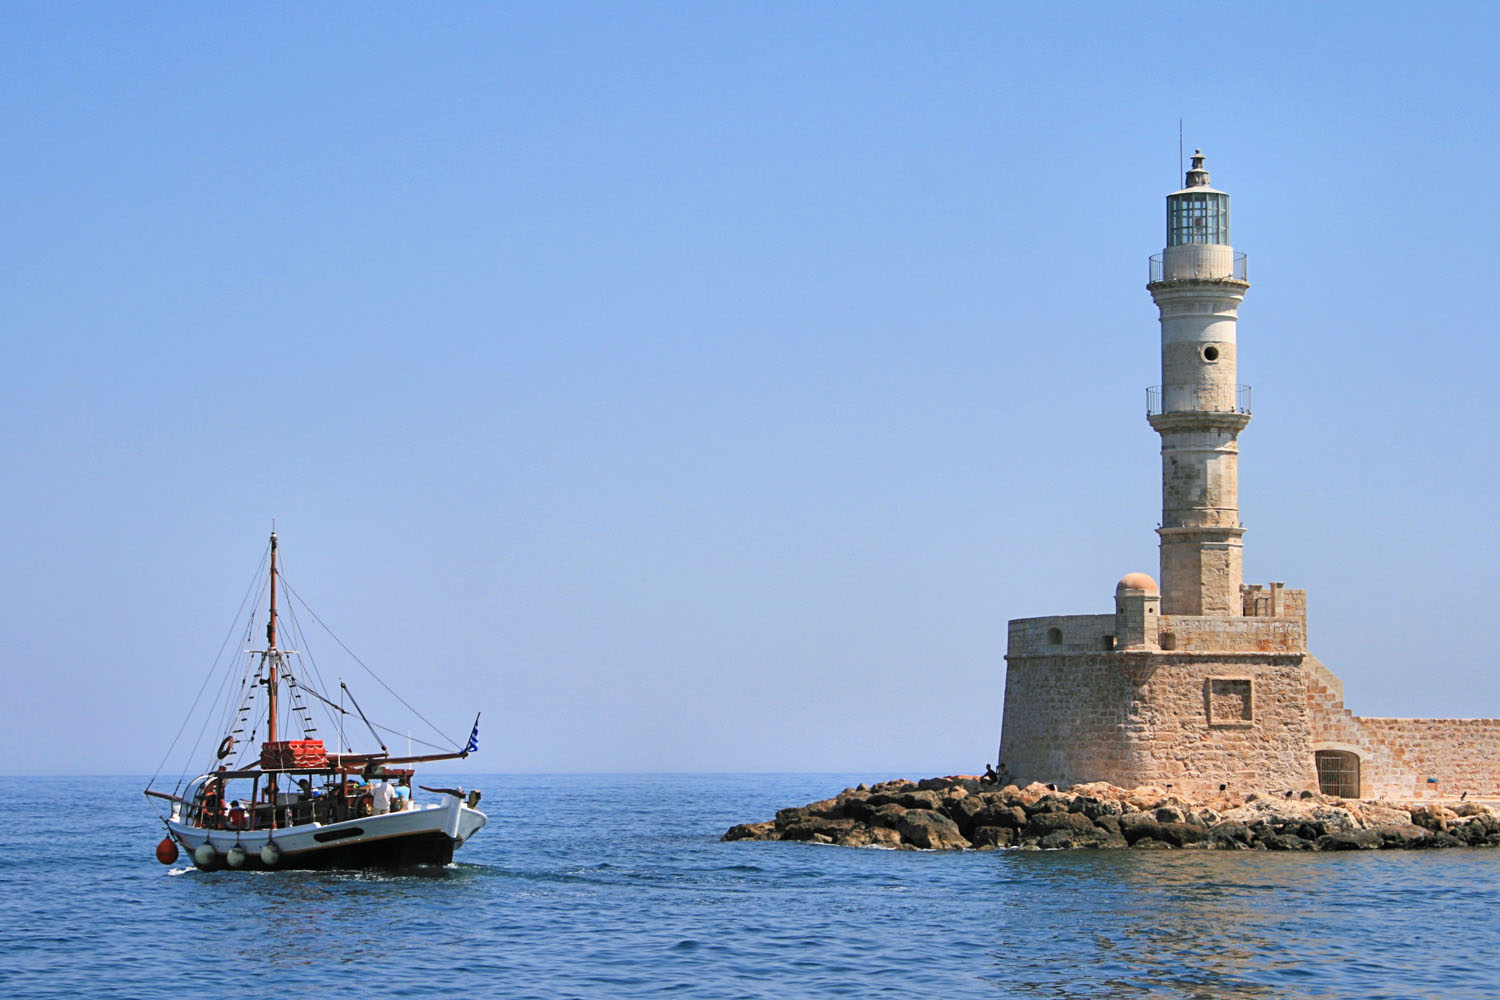 Chania Lighthouse with a small boat passing by